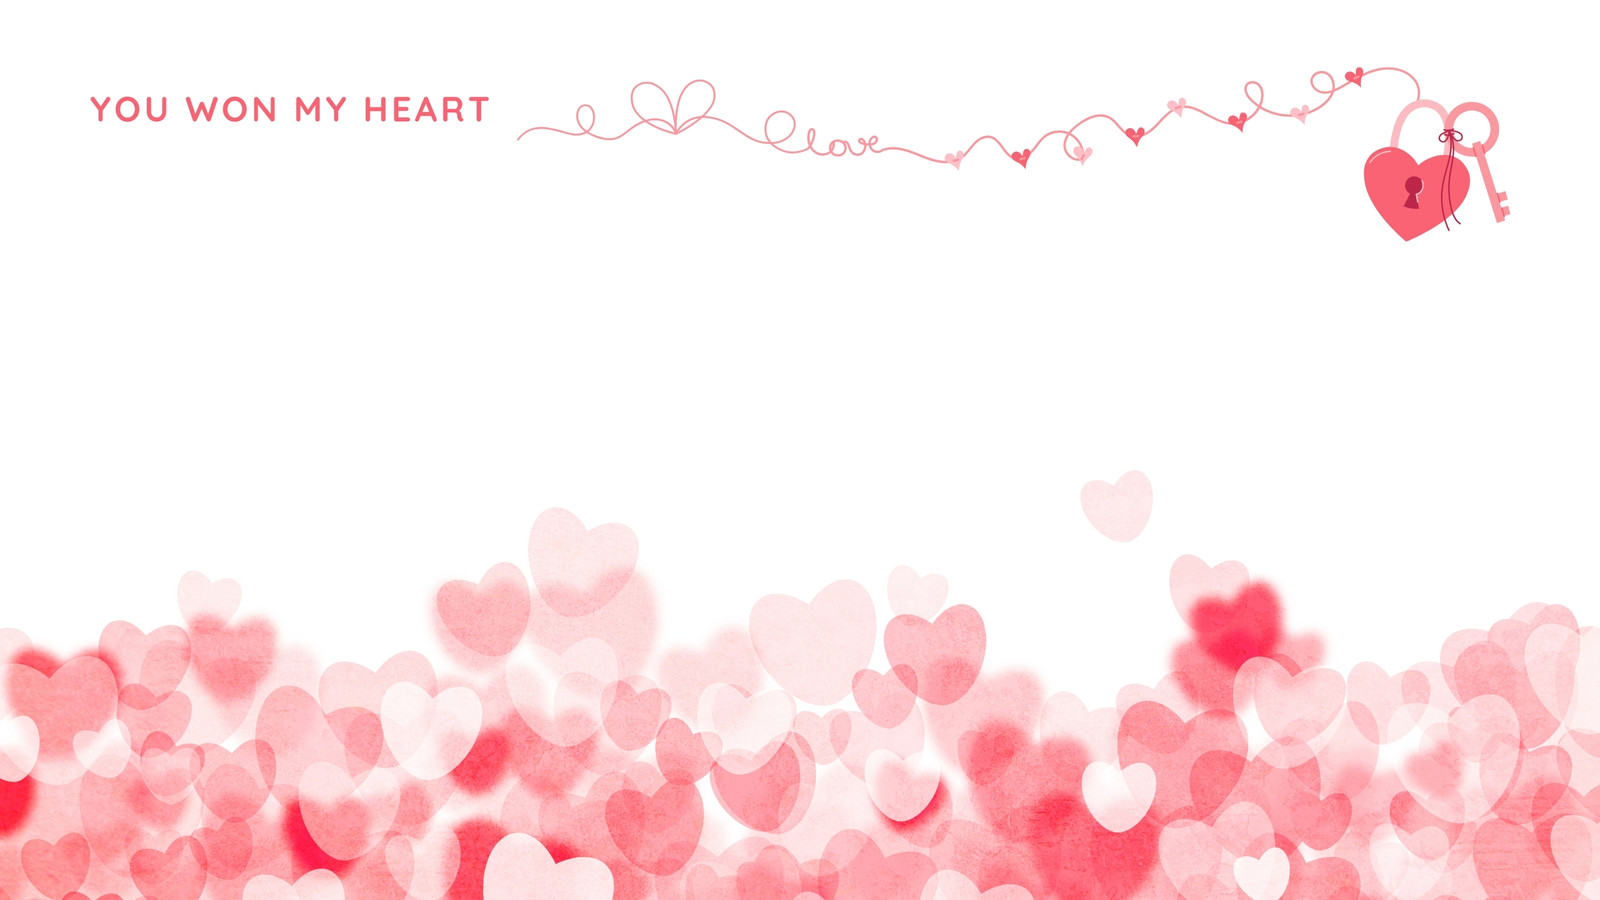 38 My Heart Will Go On Images, Stock Photos & Vectors | Shutterstock